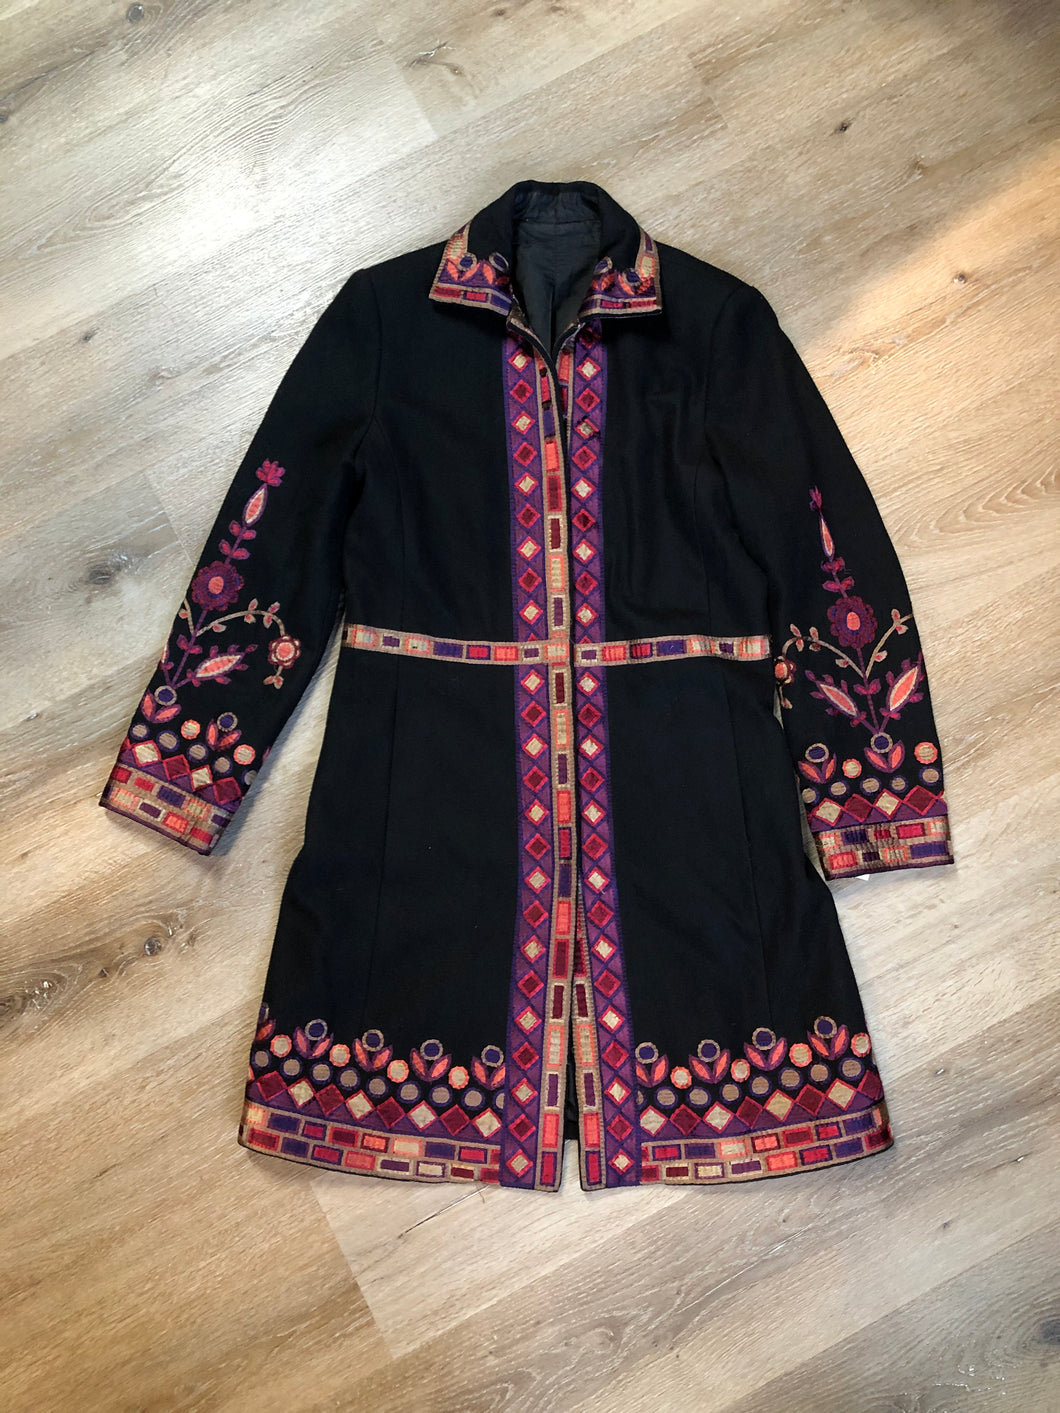 Kingspier Vintage - Black wool car coat with purple and pink flower motif embroidery, snap closures, and pockets. Size small/ medium.

Shoulder to shoulder - 17”
Shoulder to wrist - 24”
Under sleeve - 17.5”
Armpit to armpit - 19”
Armpit to hem - 27”
Bottom hem - 24”

*All items have been laid flat to measure.

This coat is in excellent condition.